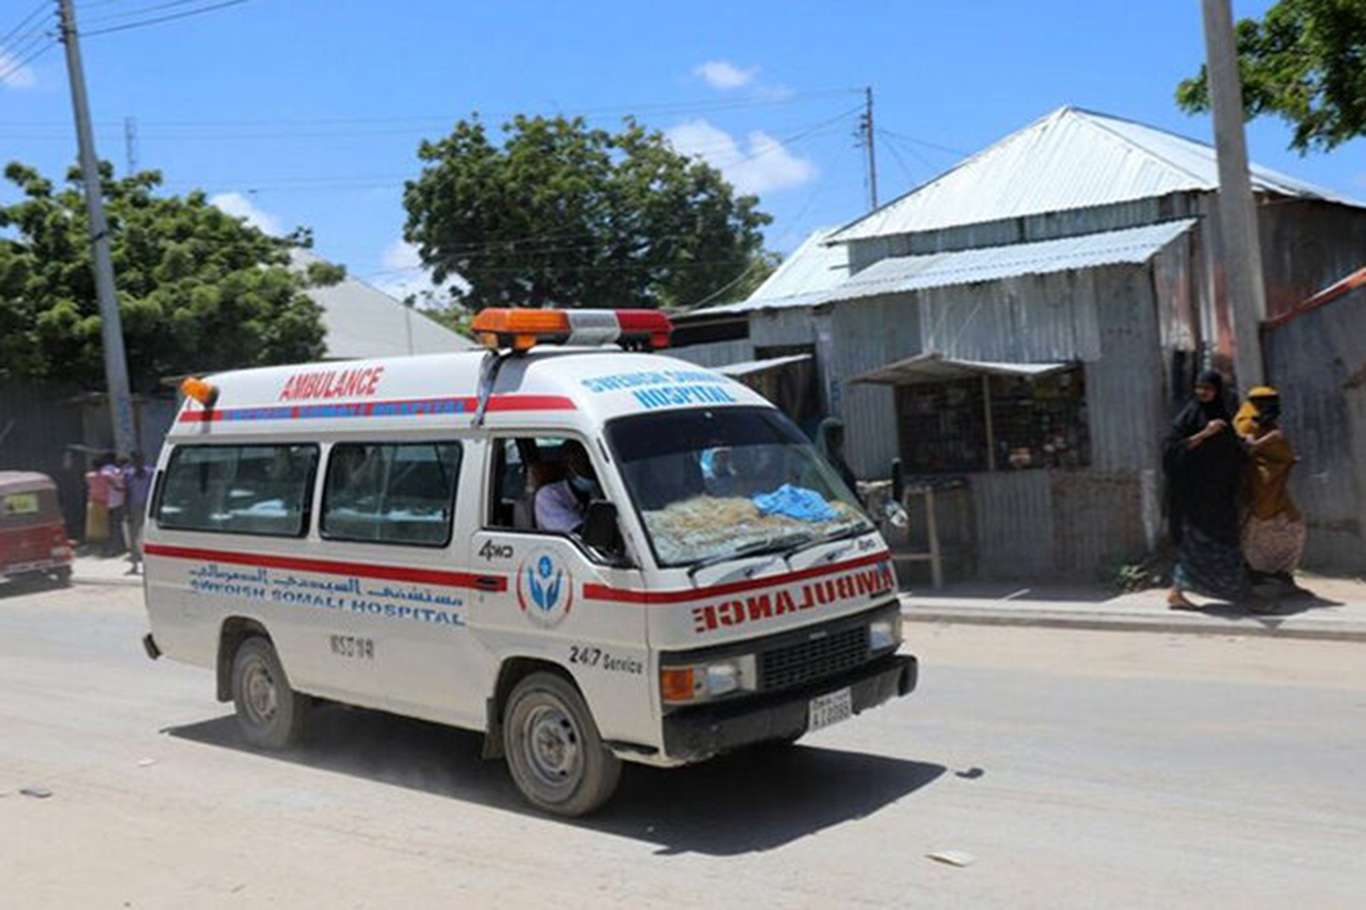 2 intelligence officers killed in a suicide attack in Somalia